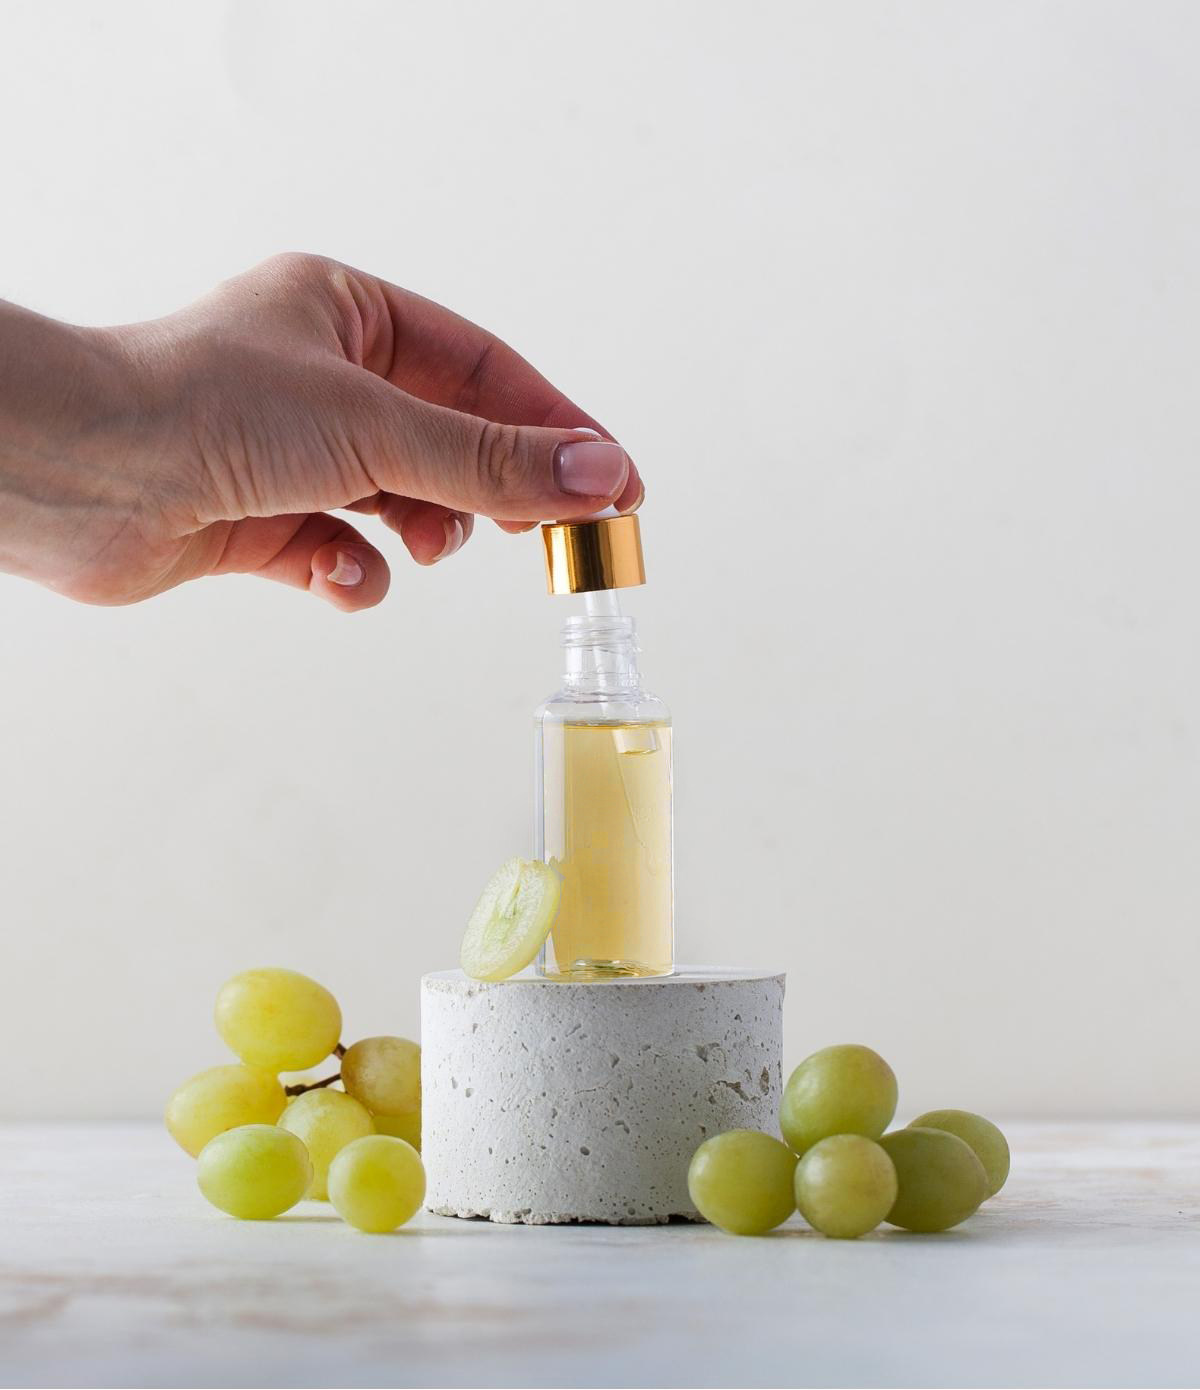 Grapeseed oil as ingredient in homemade face moisturizer.